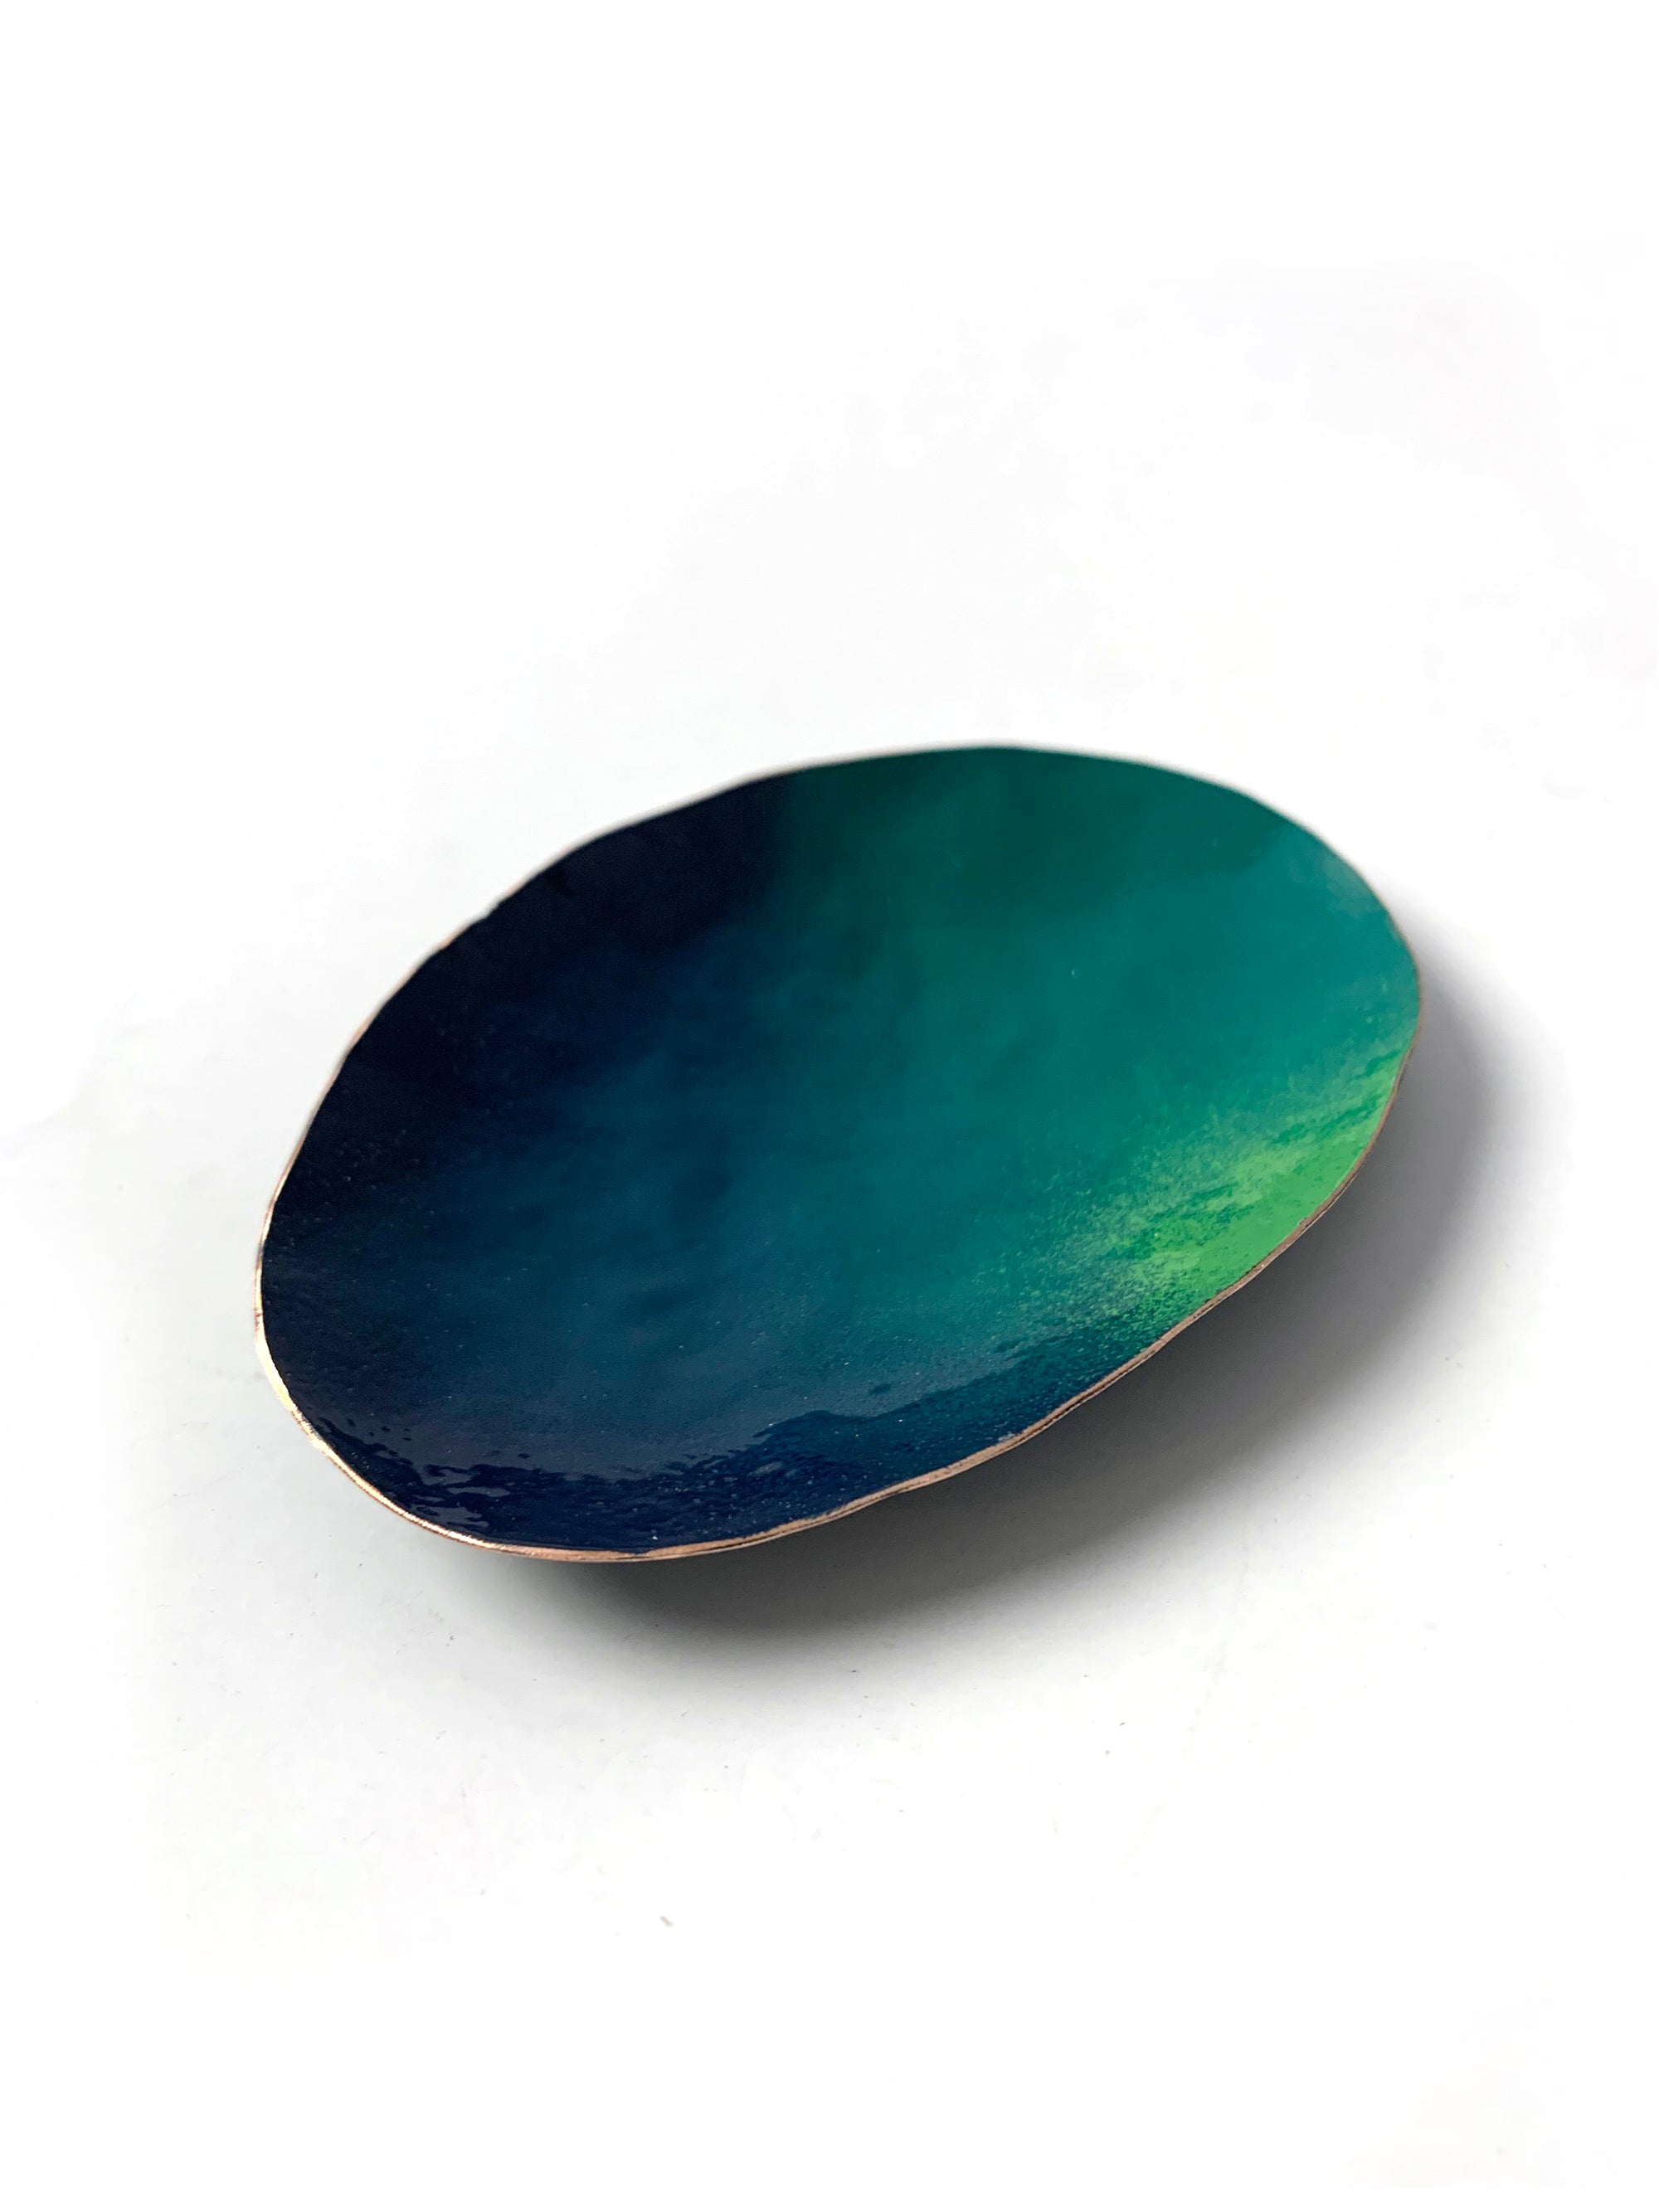 Oval Copper Dish in Emerald Green, Deep Ocean, and Fresh Green